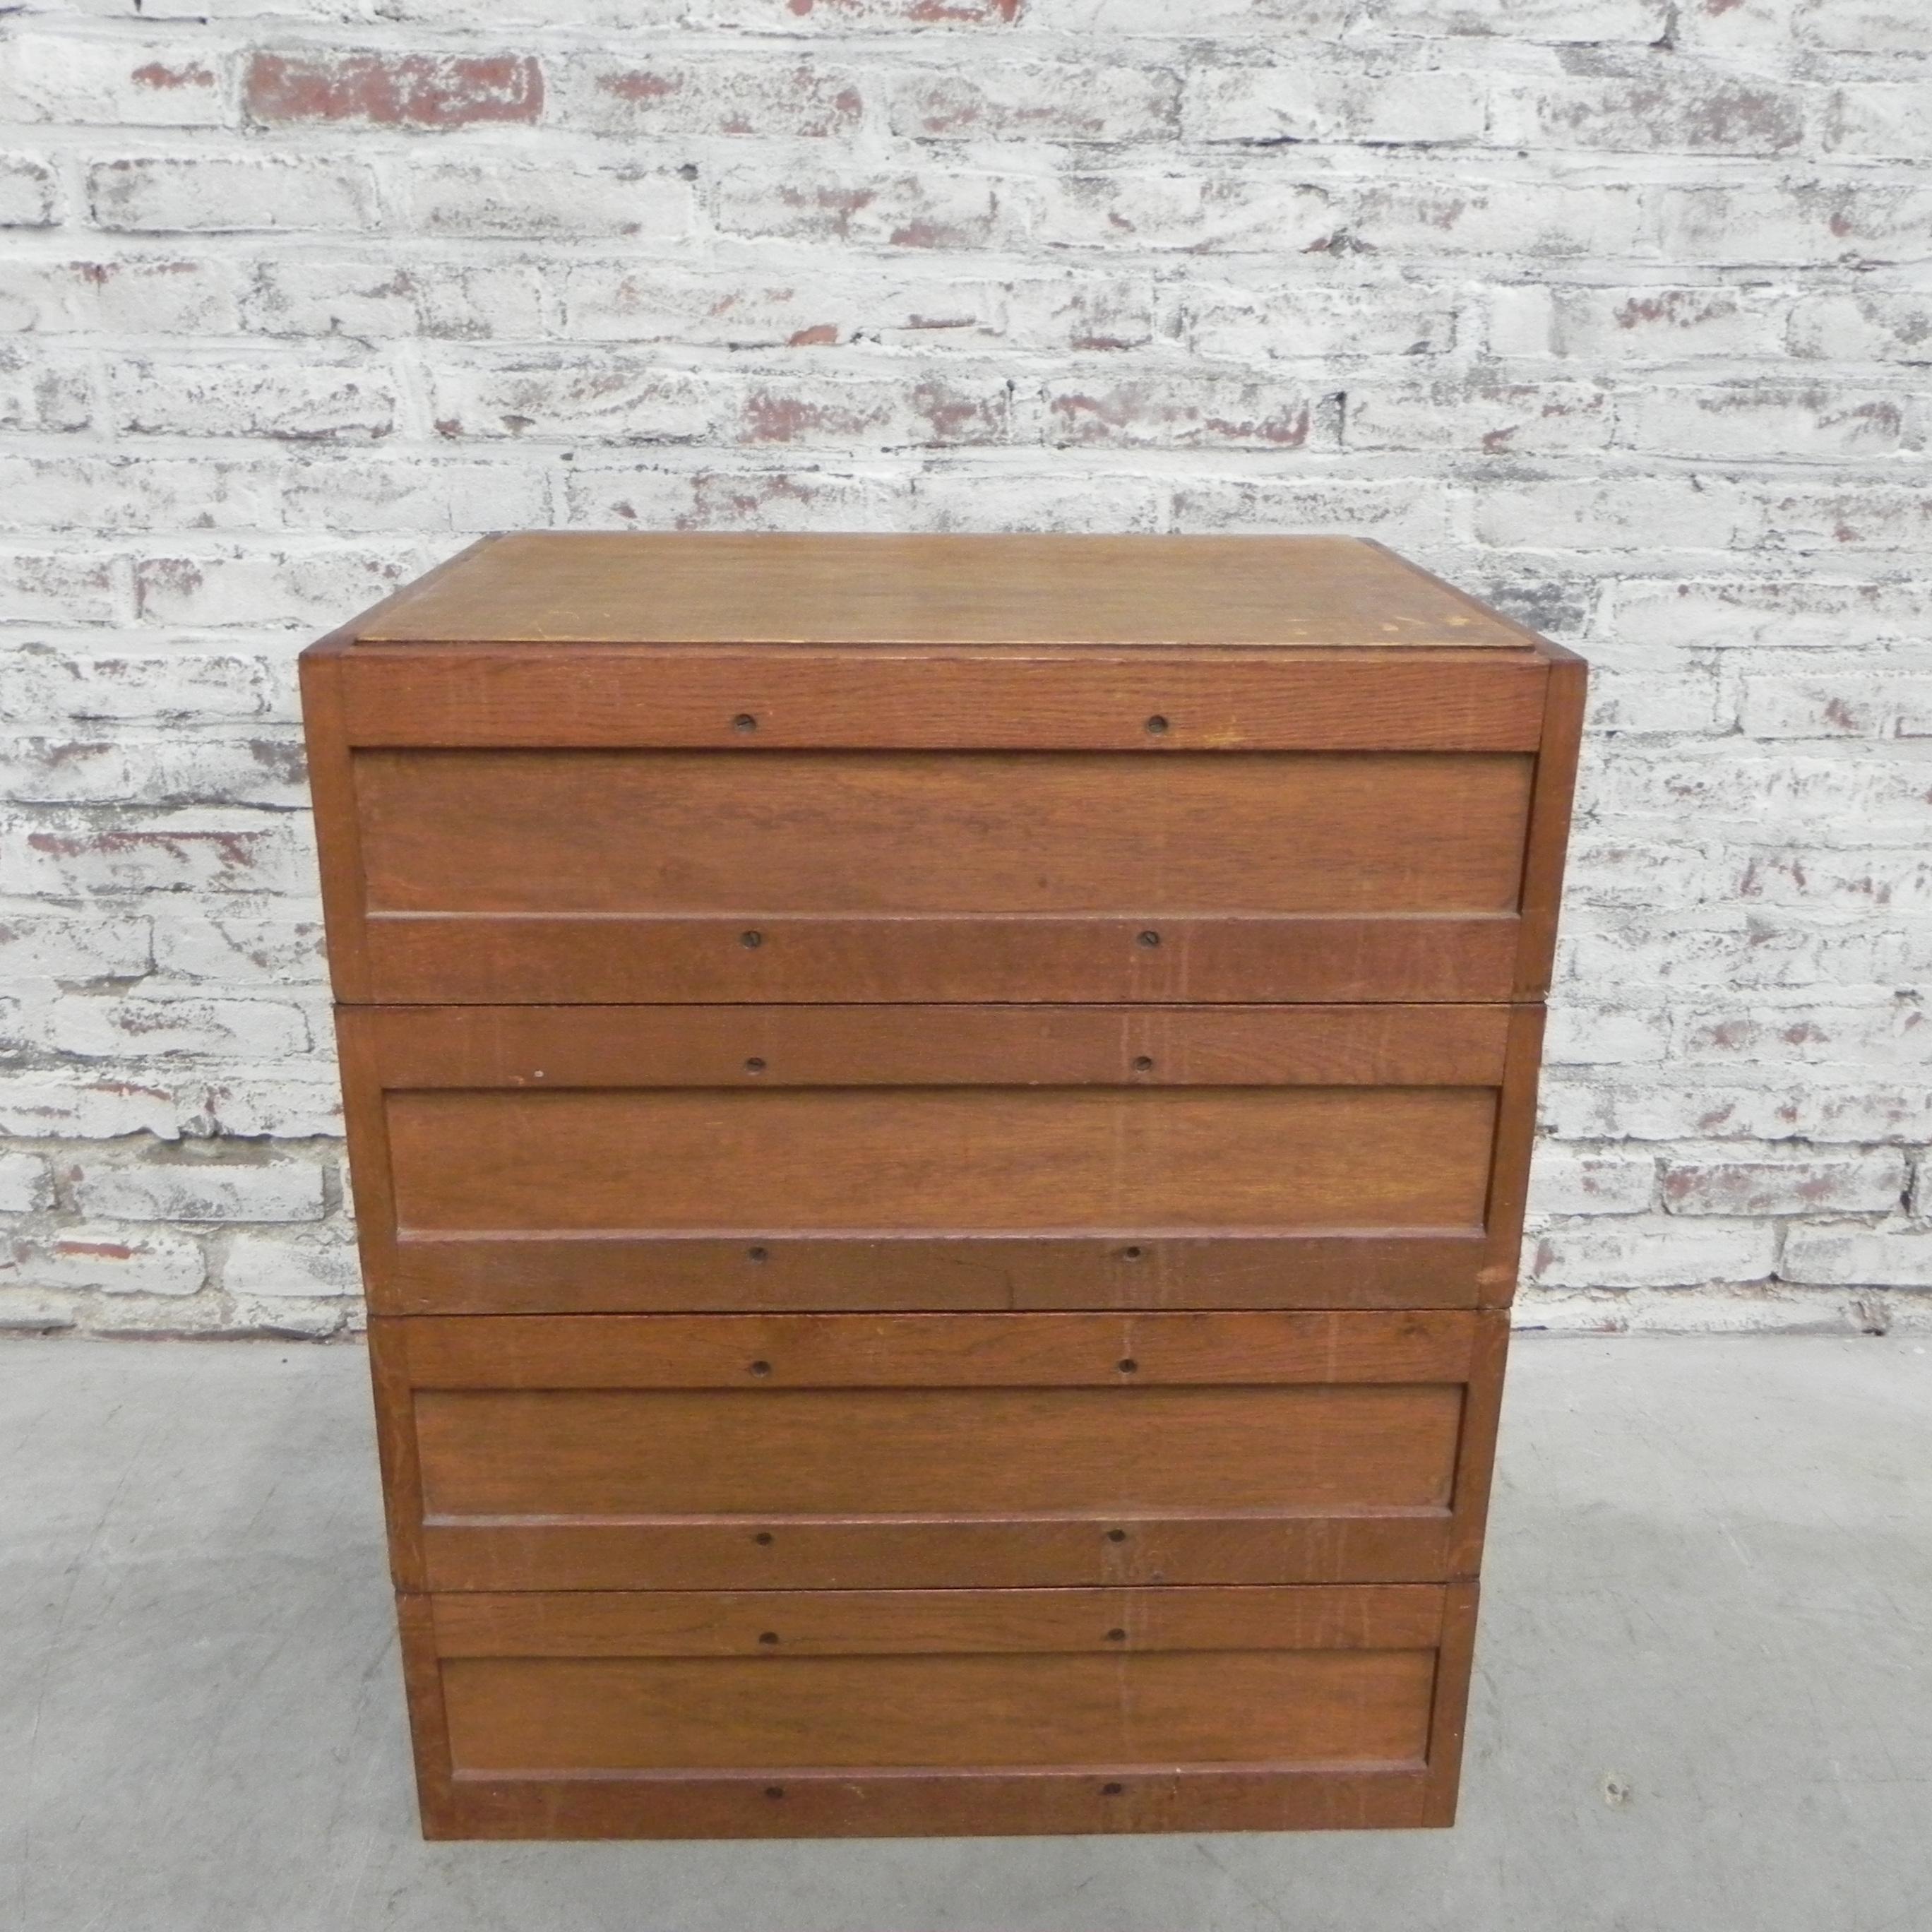 Steel Chest of Drawers with 12 Drawers